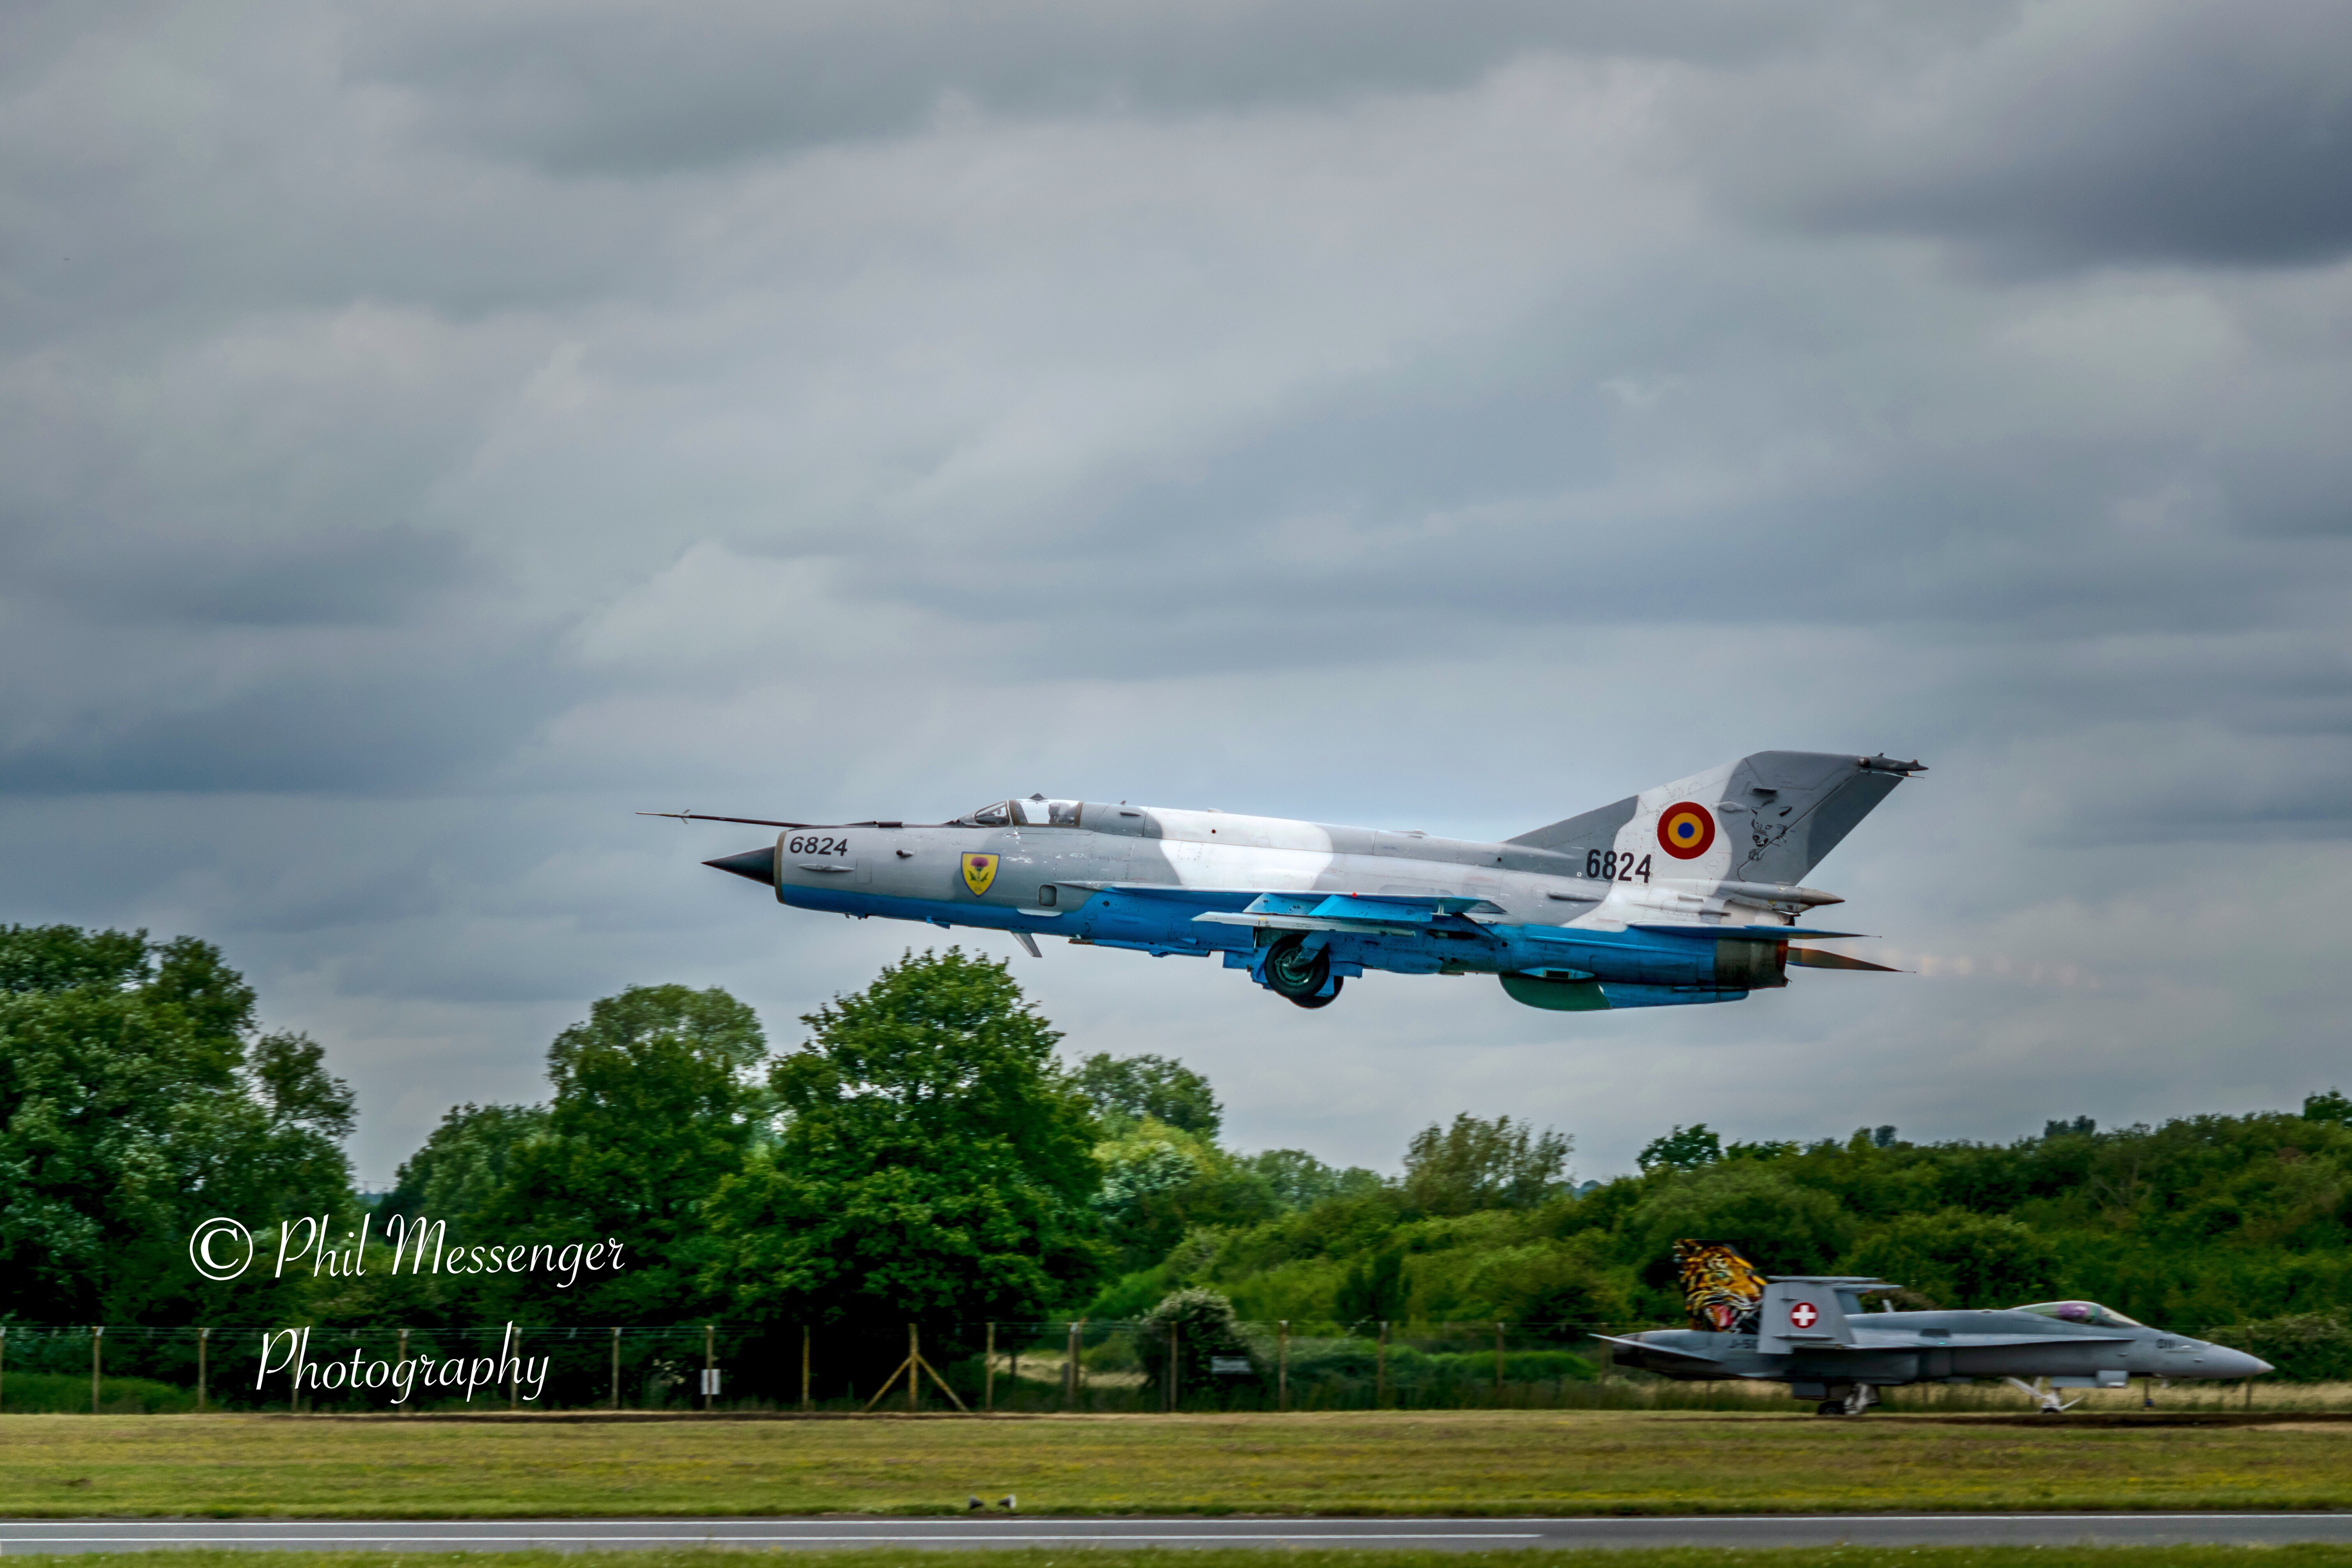 Romanian Air Force MIG-21 Lancer C take off with the Swiss Hornet in the background at The Royal International Air Tattoo.